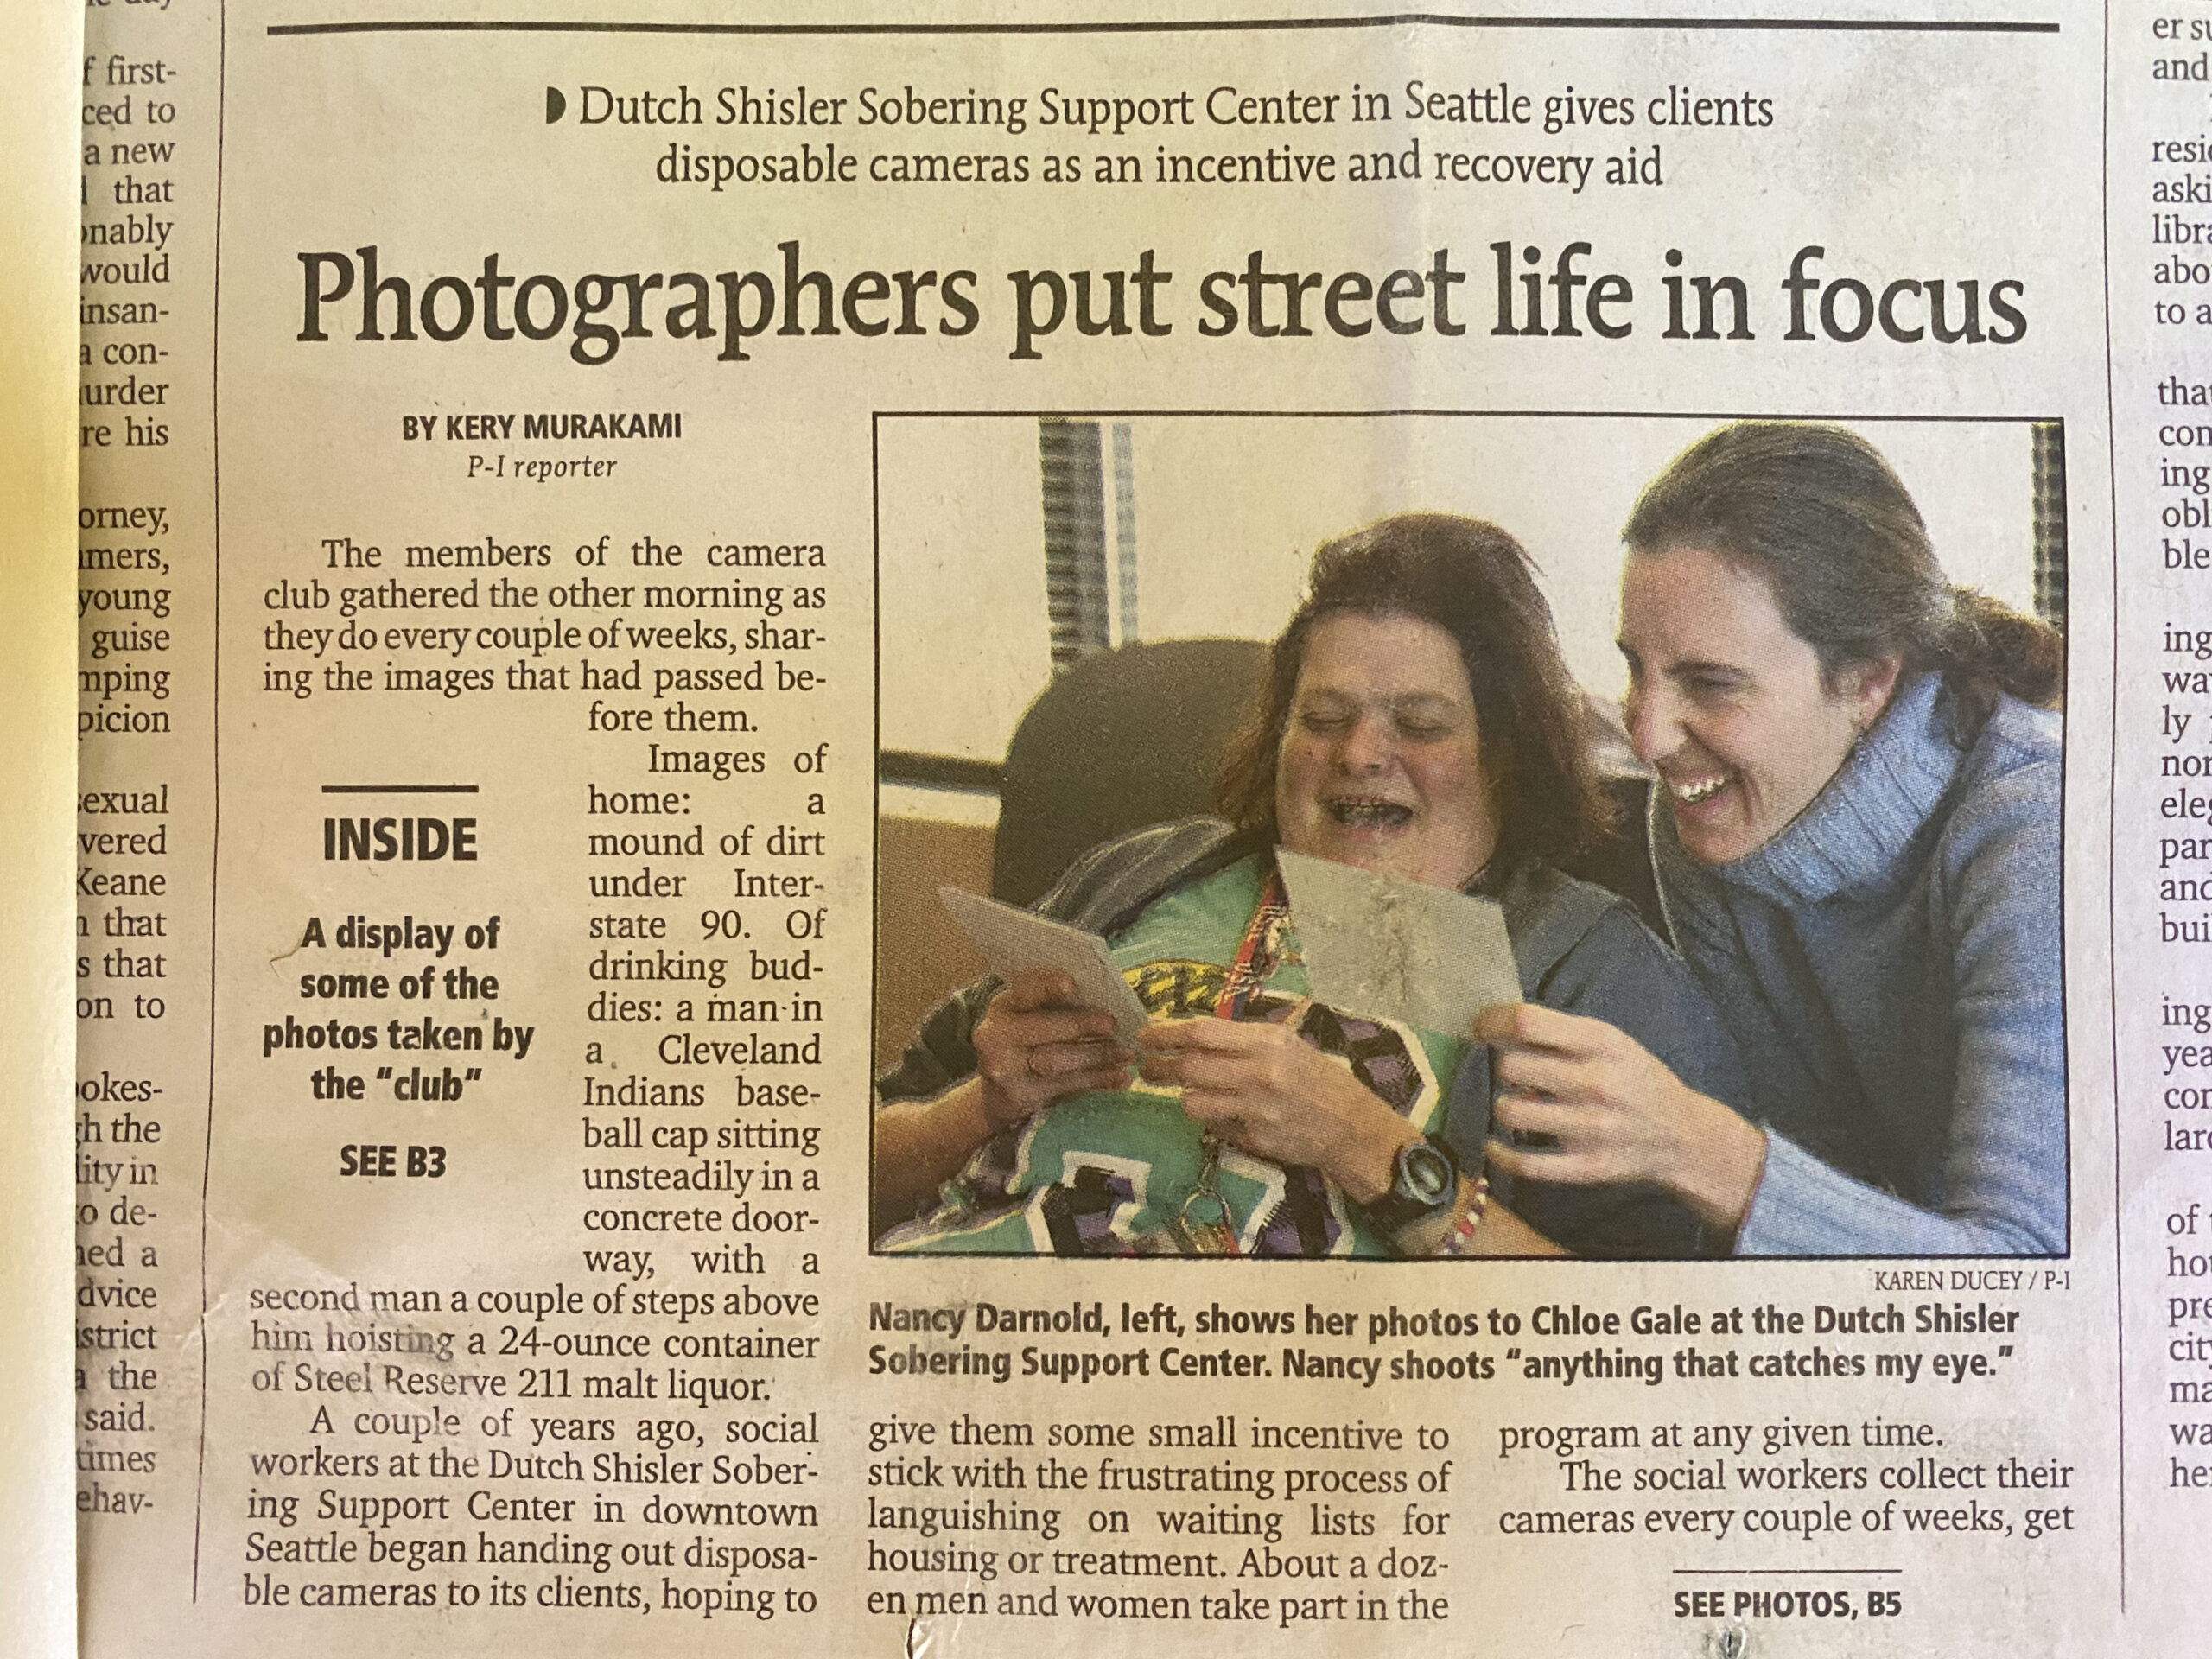 newspaper clipping with the headline "photographers put street life in focus" from 2000.